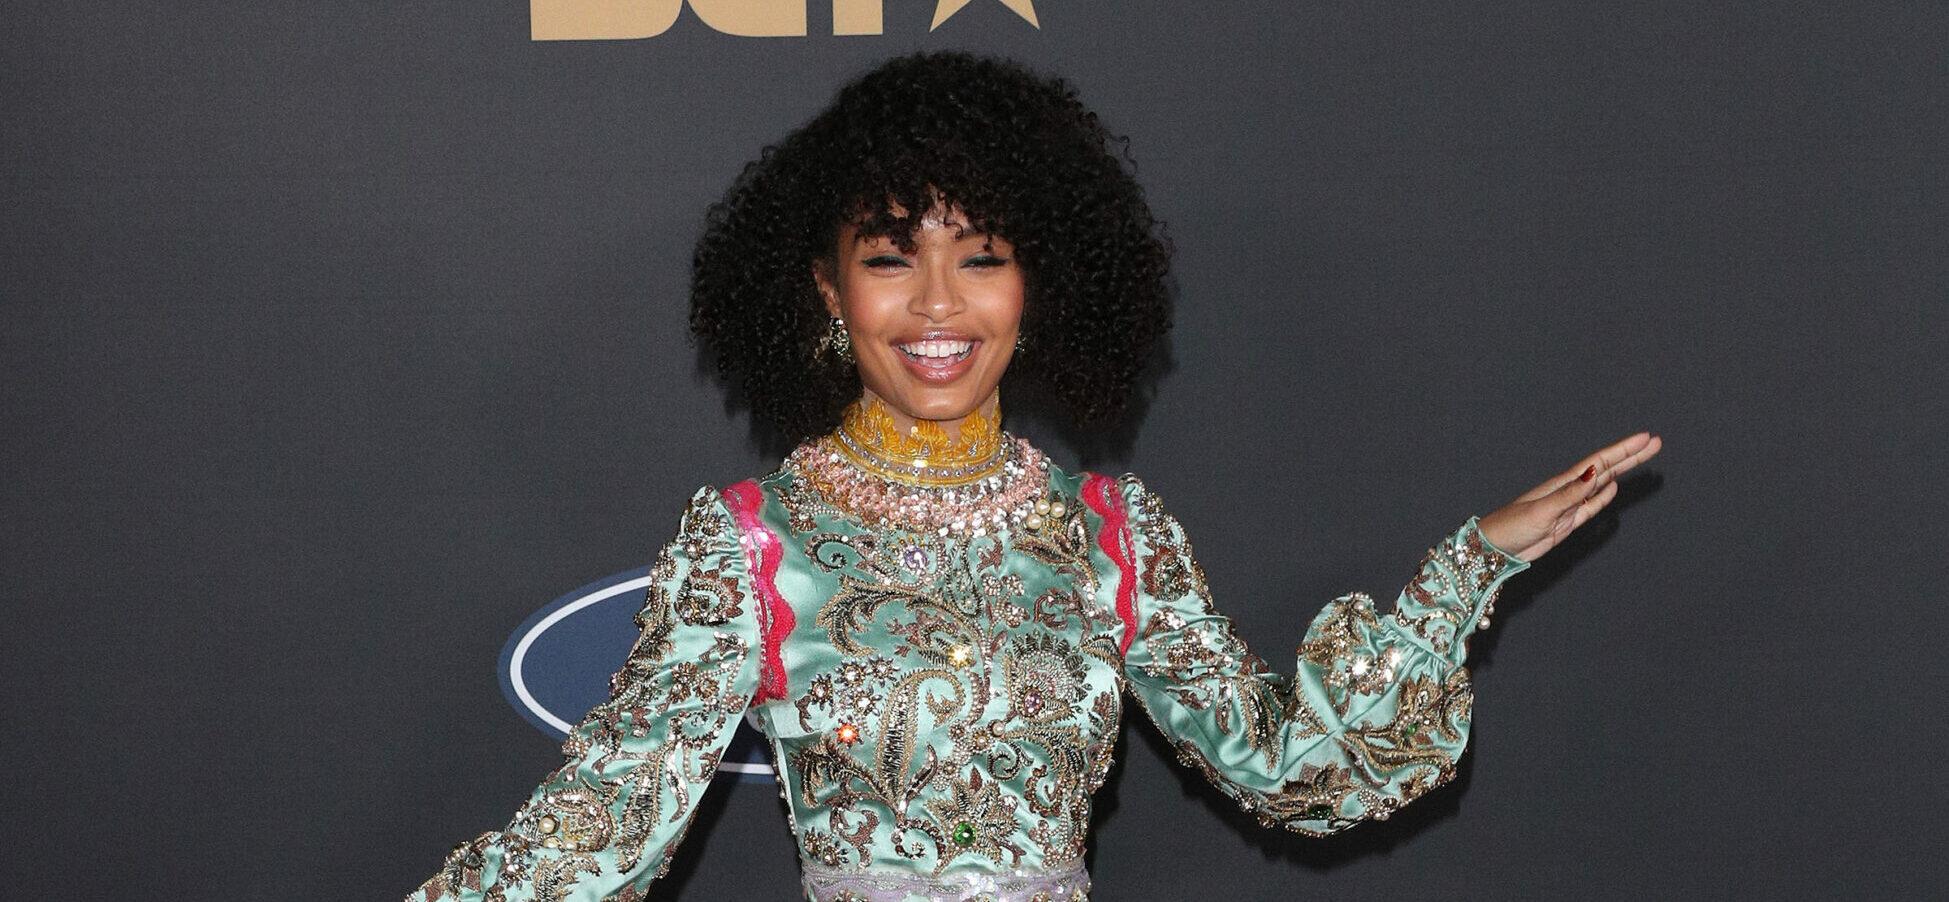 Fans Speak Out After Seeing Yara Shahidi’s Tinkerbell In ‘Peter Pan And Wendy’